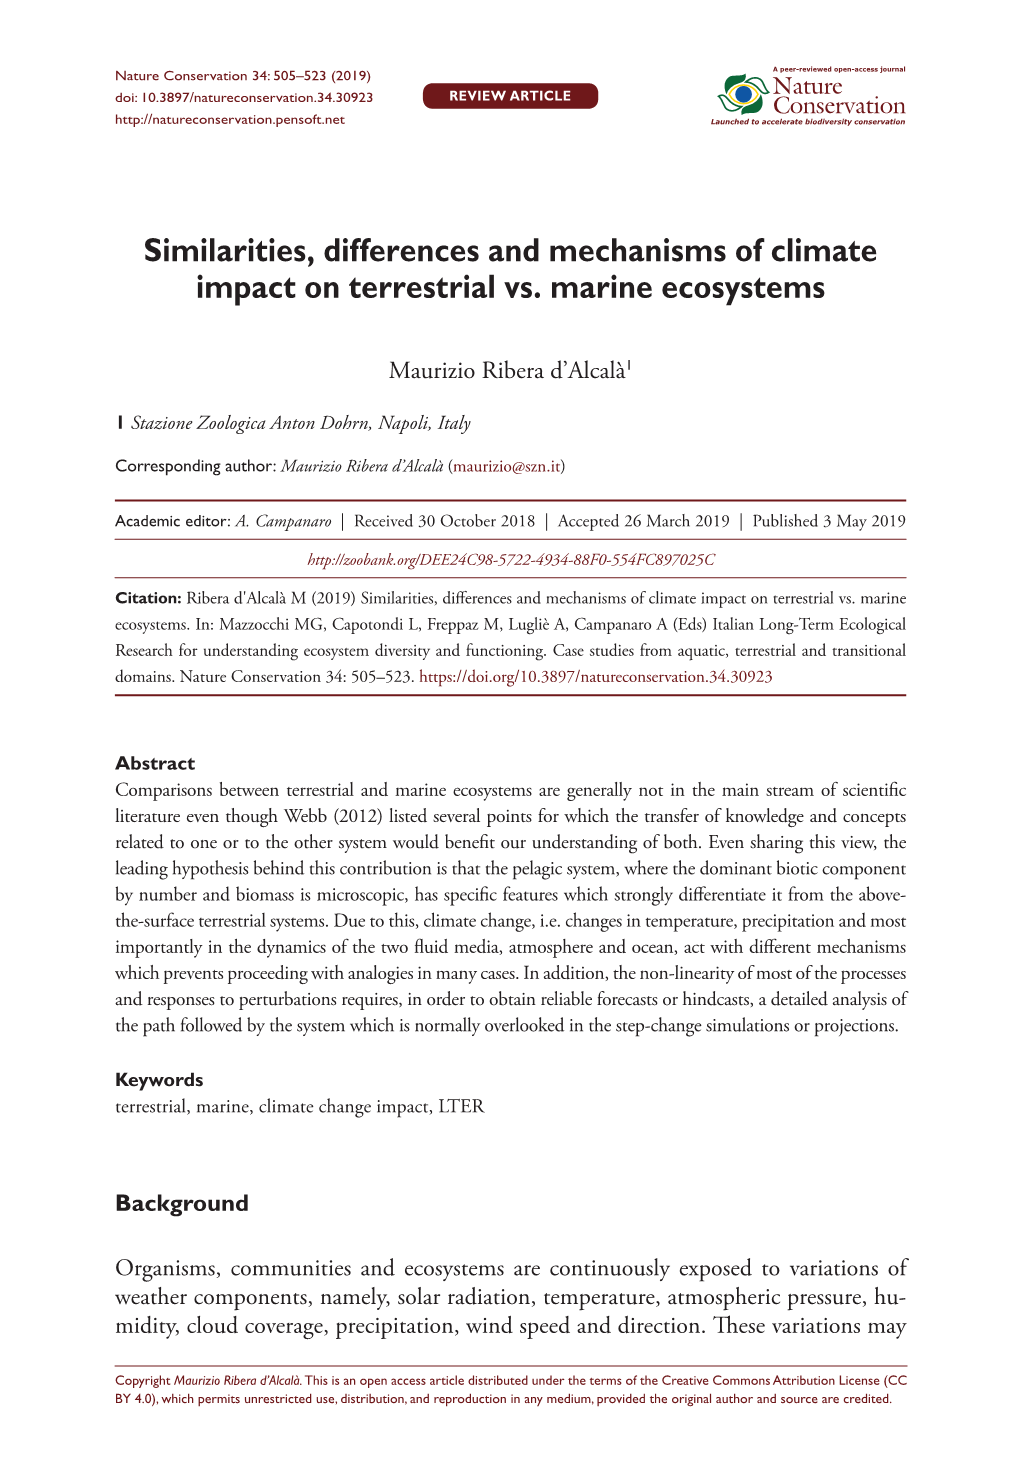 Similarities, Differences and Mechanisms of Climate Impact on Terrestrial Vs